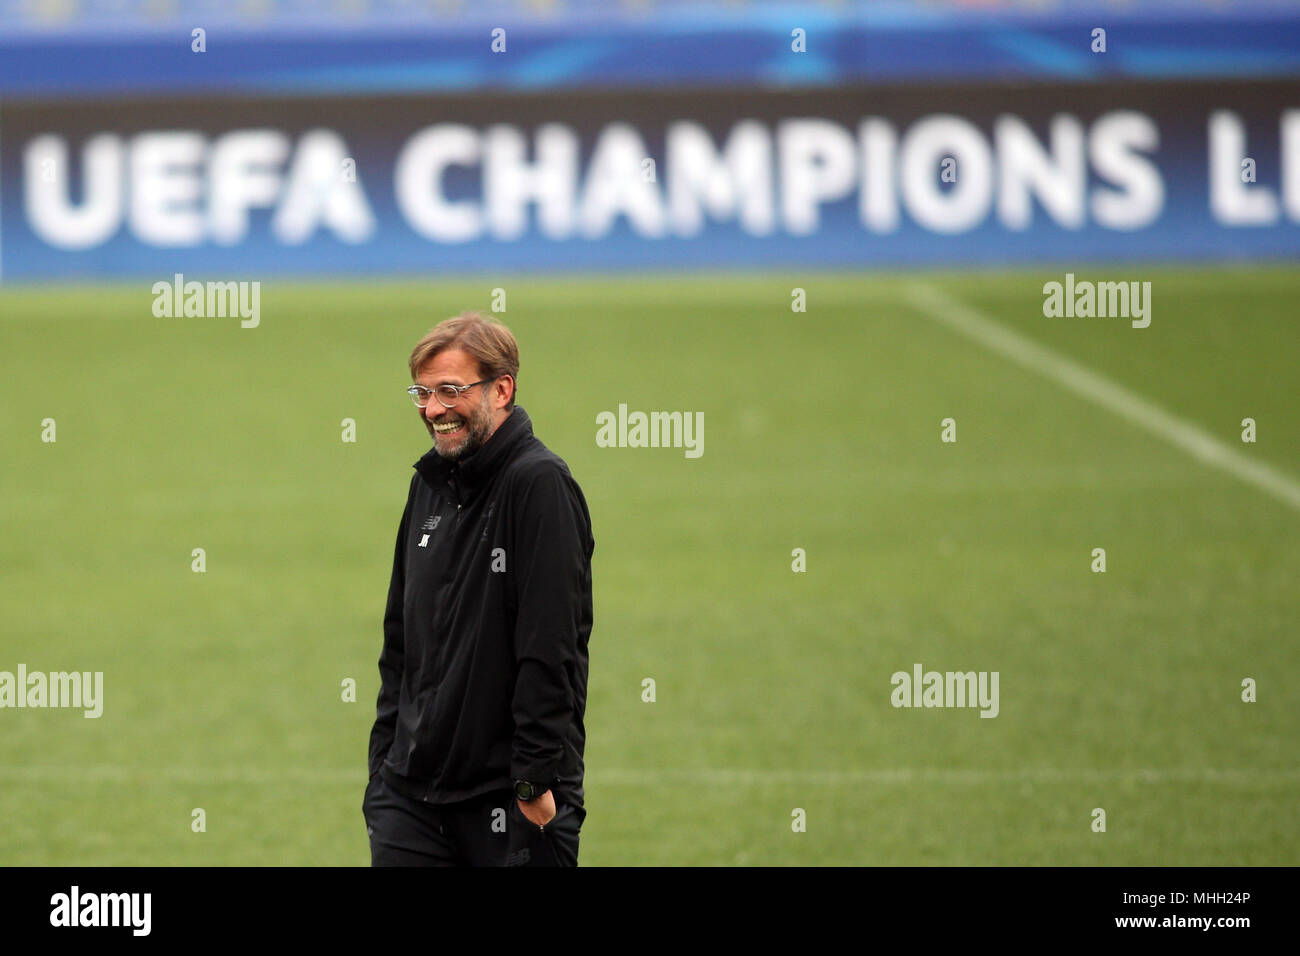 Rome, Italy. 1st May, 2018. Jurgen Klopp during the press conference before the Uefa Champions League match AS Roma vs Liverpool in olympic stadium in Rome. Credit: marco iacobucci/Alamy Live News Stock Photo